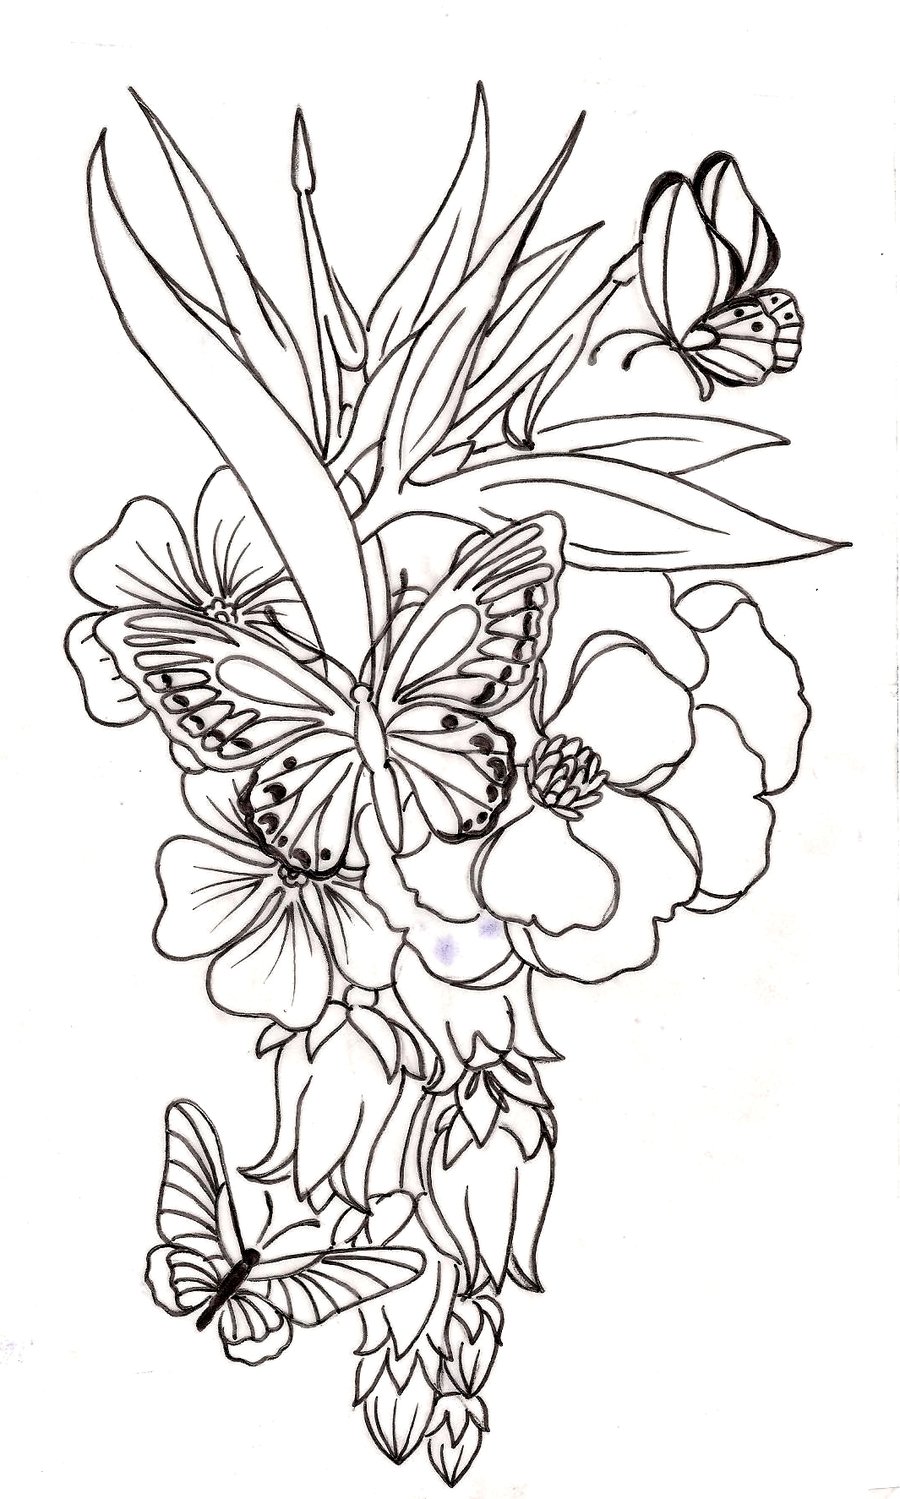 Flowers And Vines Drawing at GetDrawings.com | Free for personal use